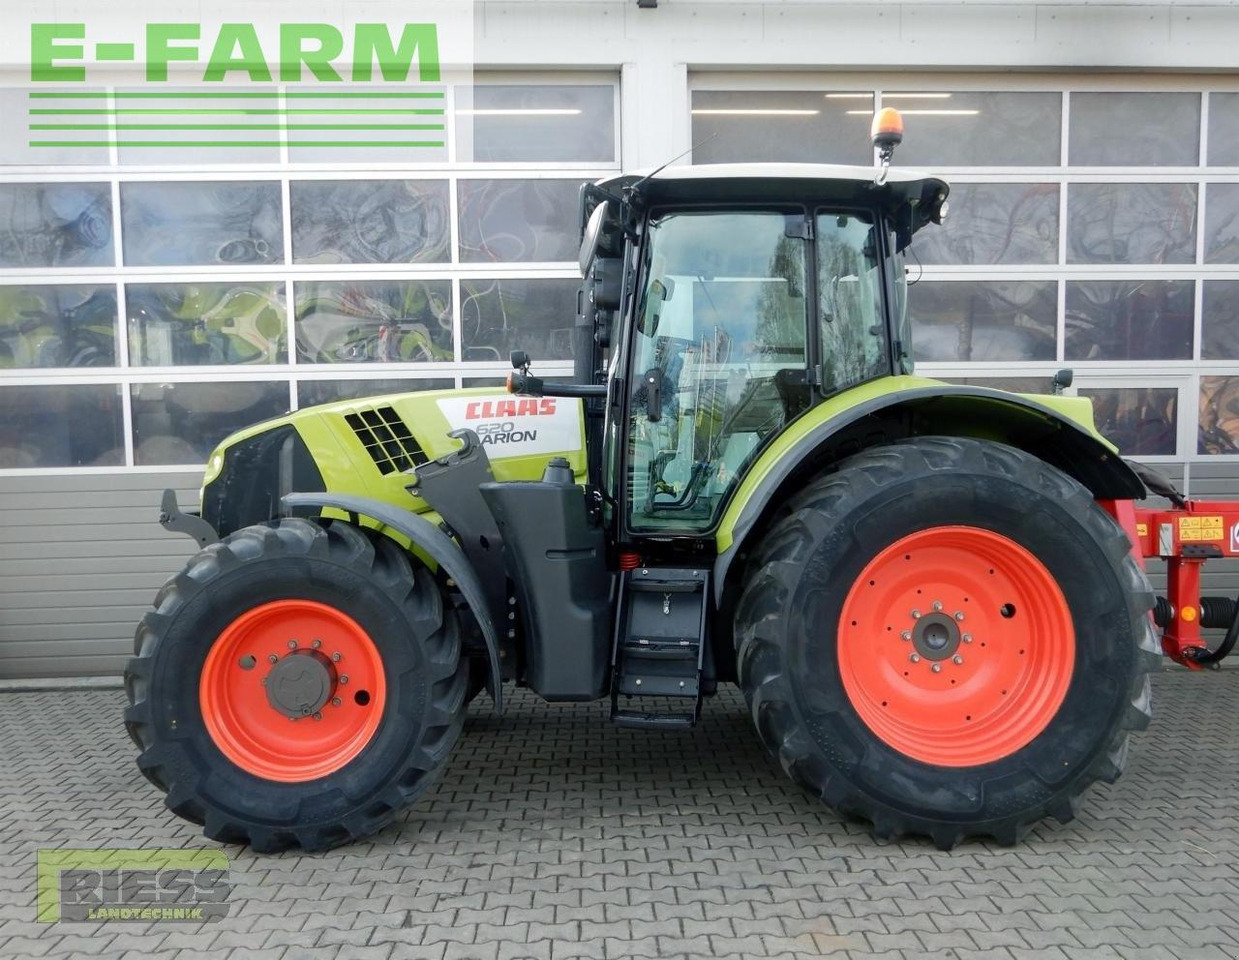 Tractor CLAAS arion 620 cis a36 CIS